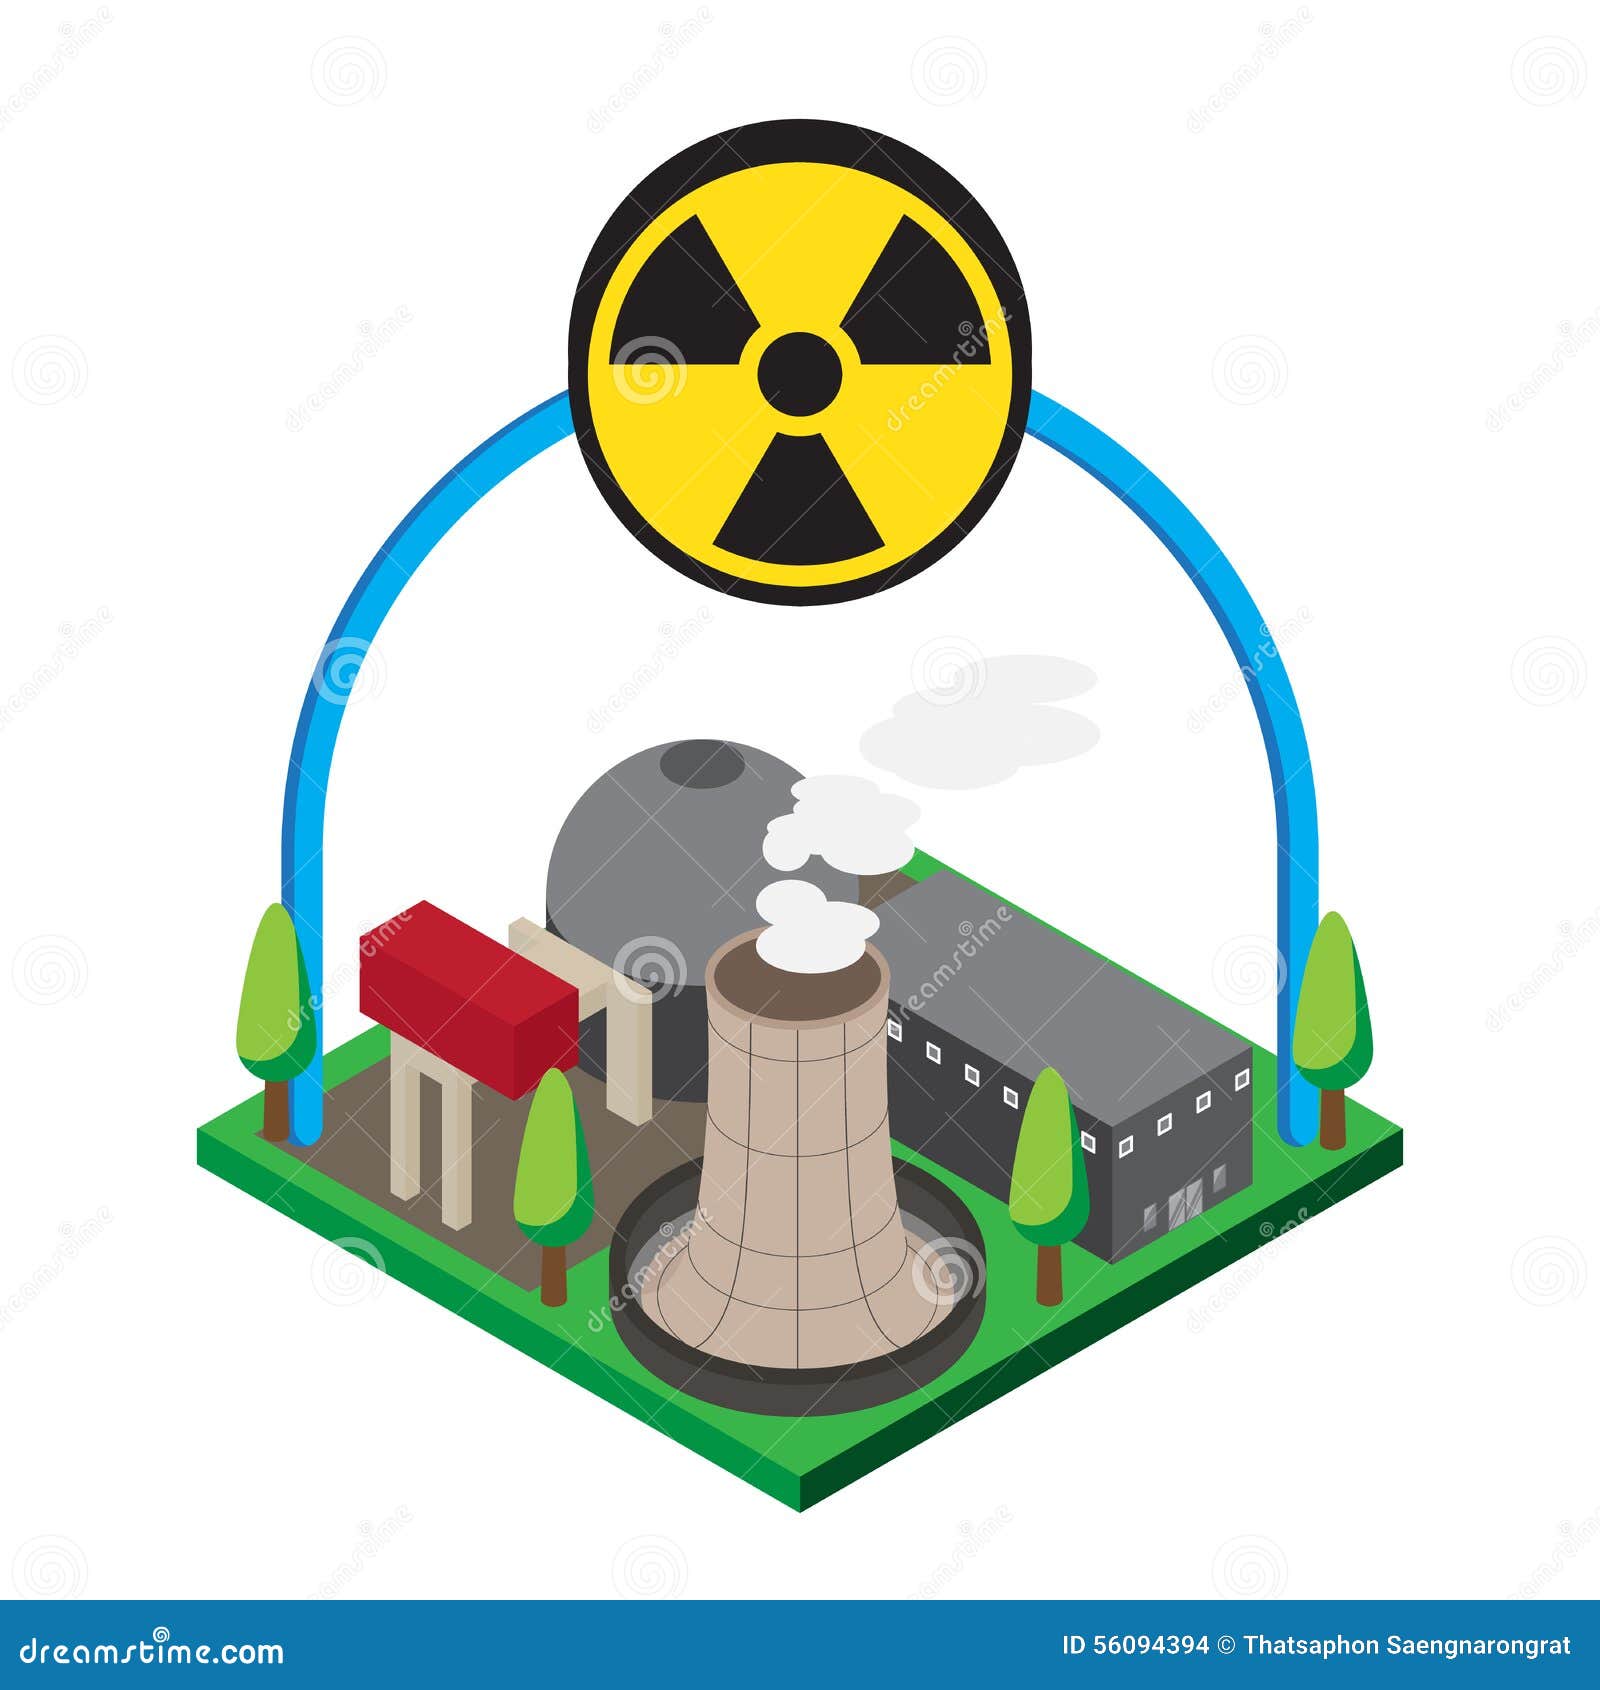 clipart of nuclear power plant - photo #25